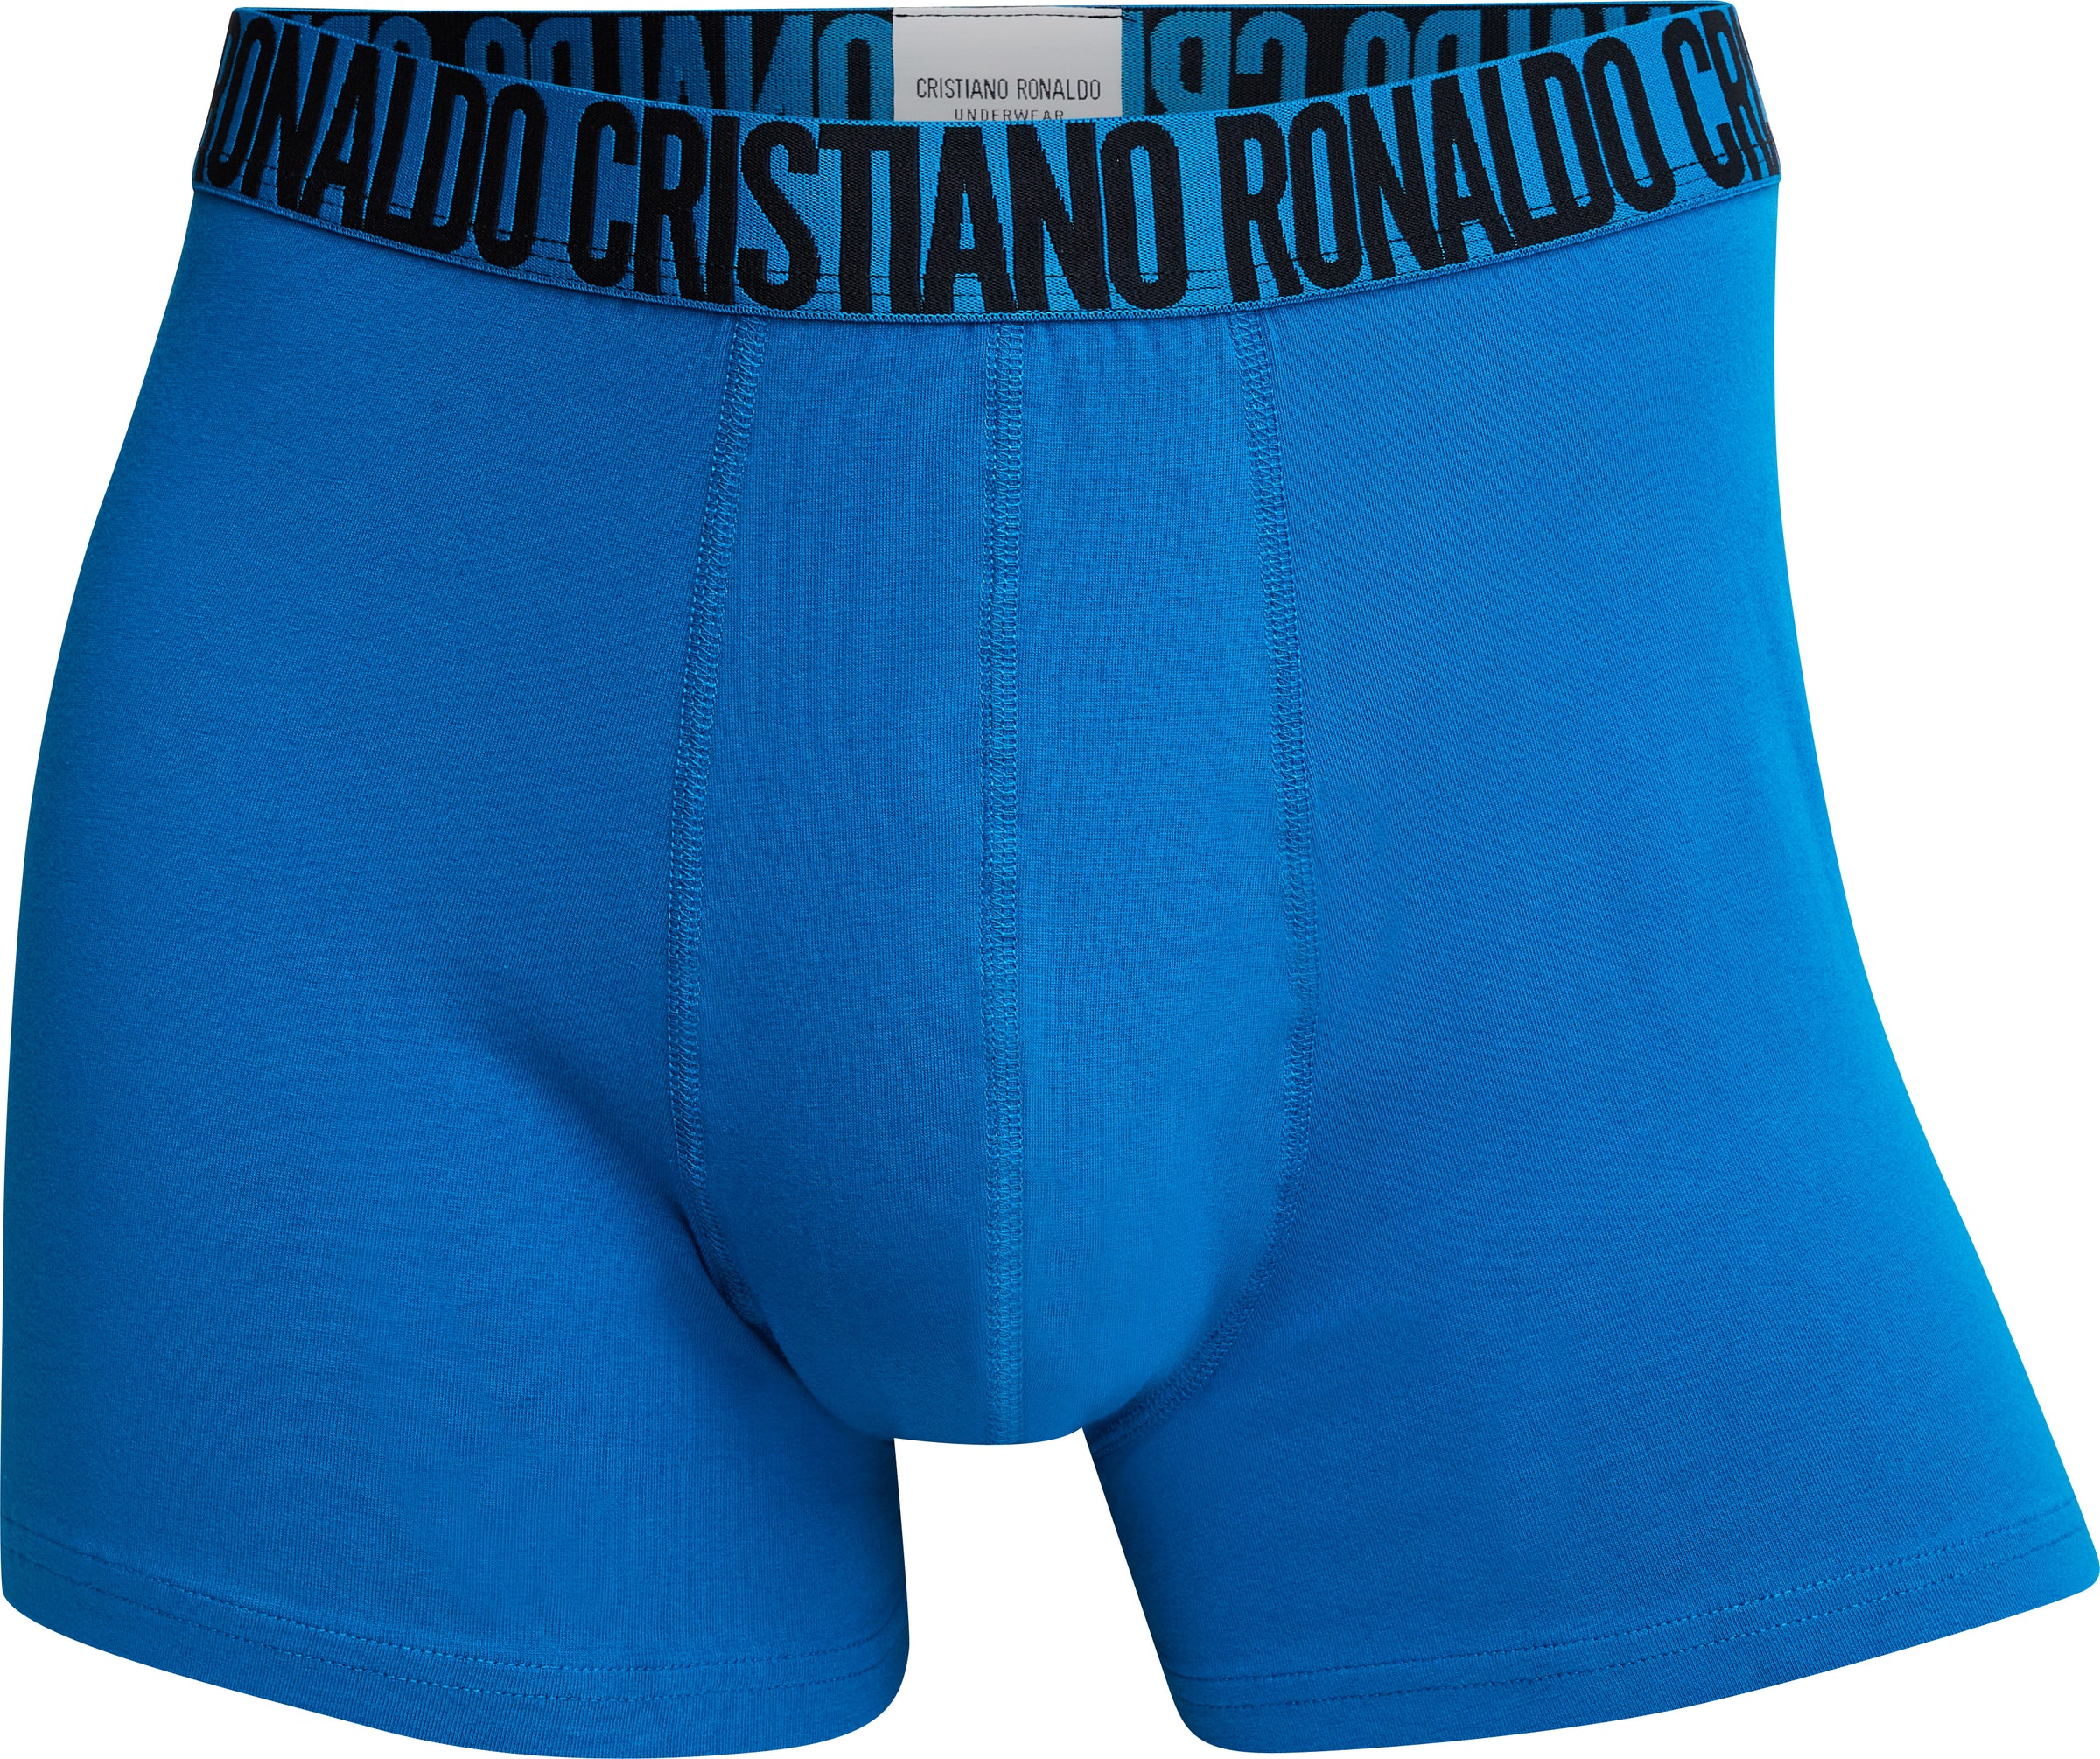 e-Tax  40.02% OFF on cr7 Multicolour Basic w AOP Trunk 3-pack